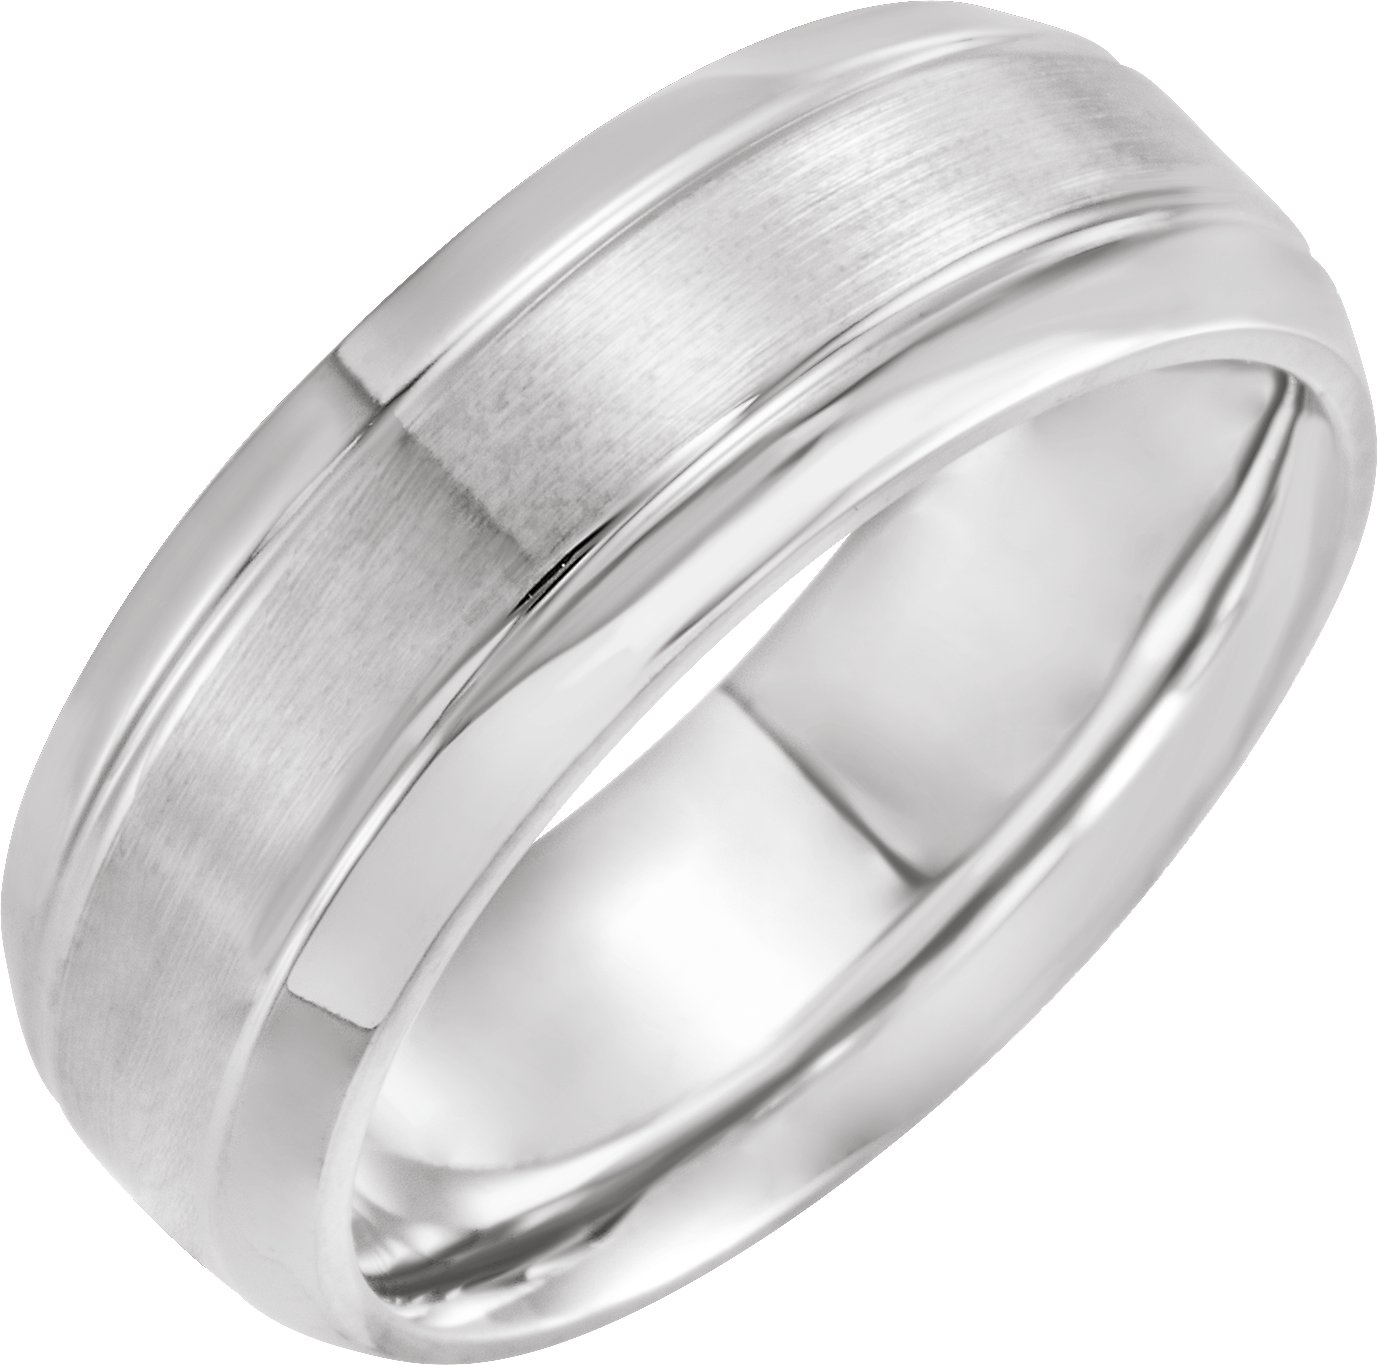 Continuum Sterling Silver 8 mm Grooved Beveled Edge Band Size 13 Ref 16265668